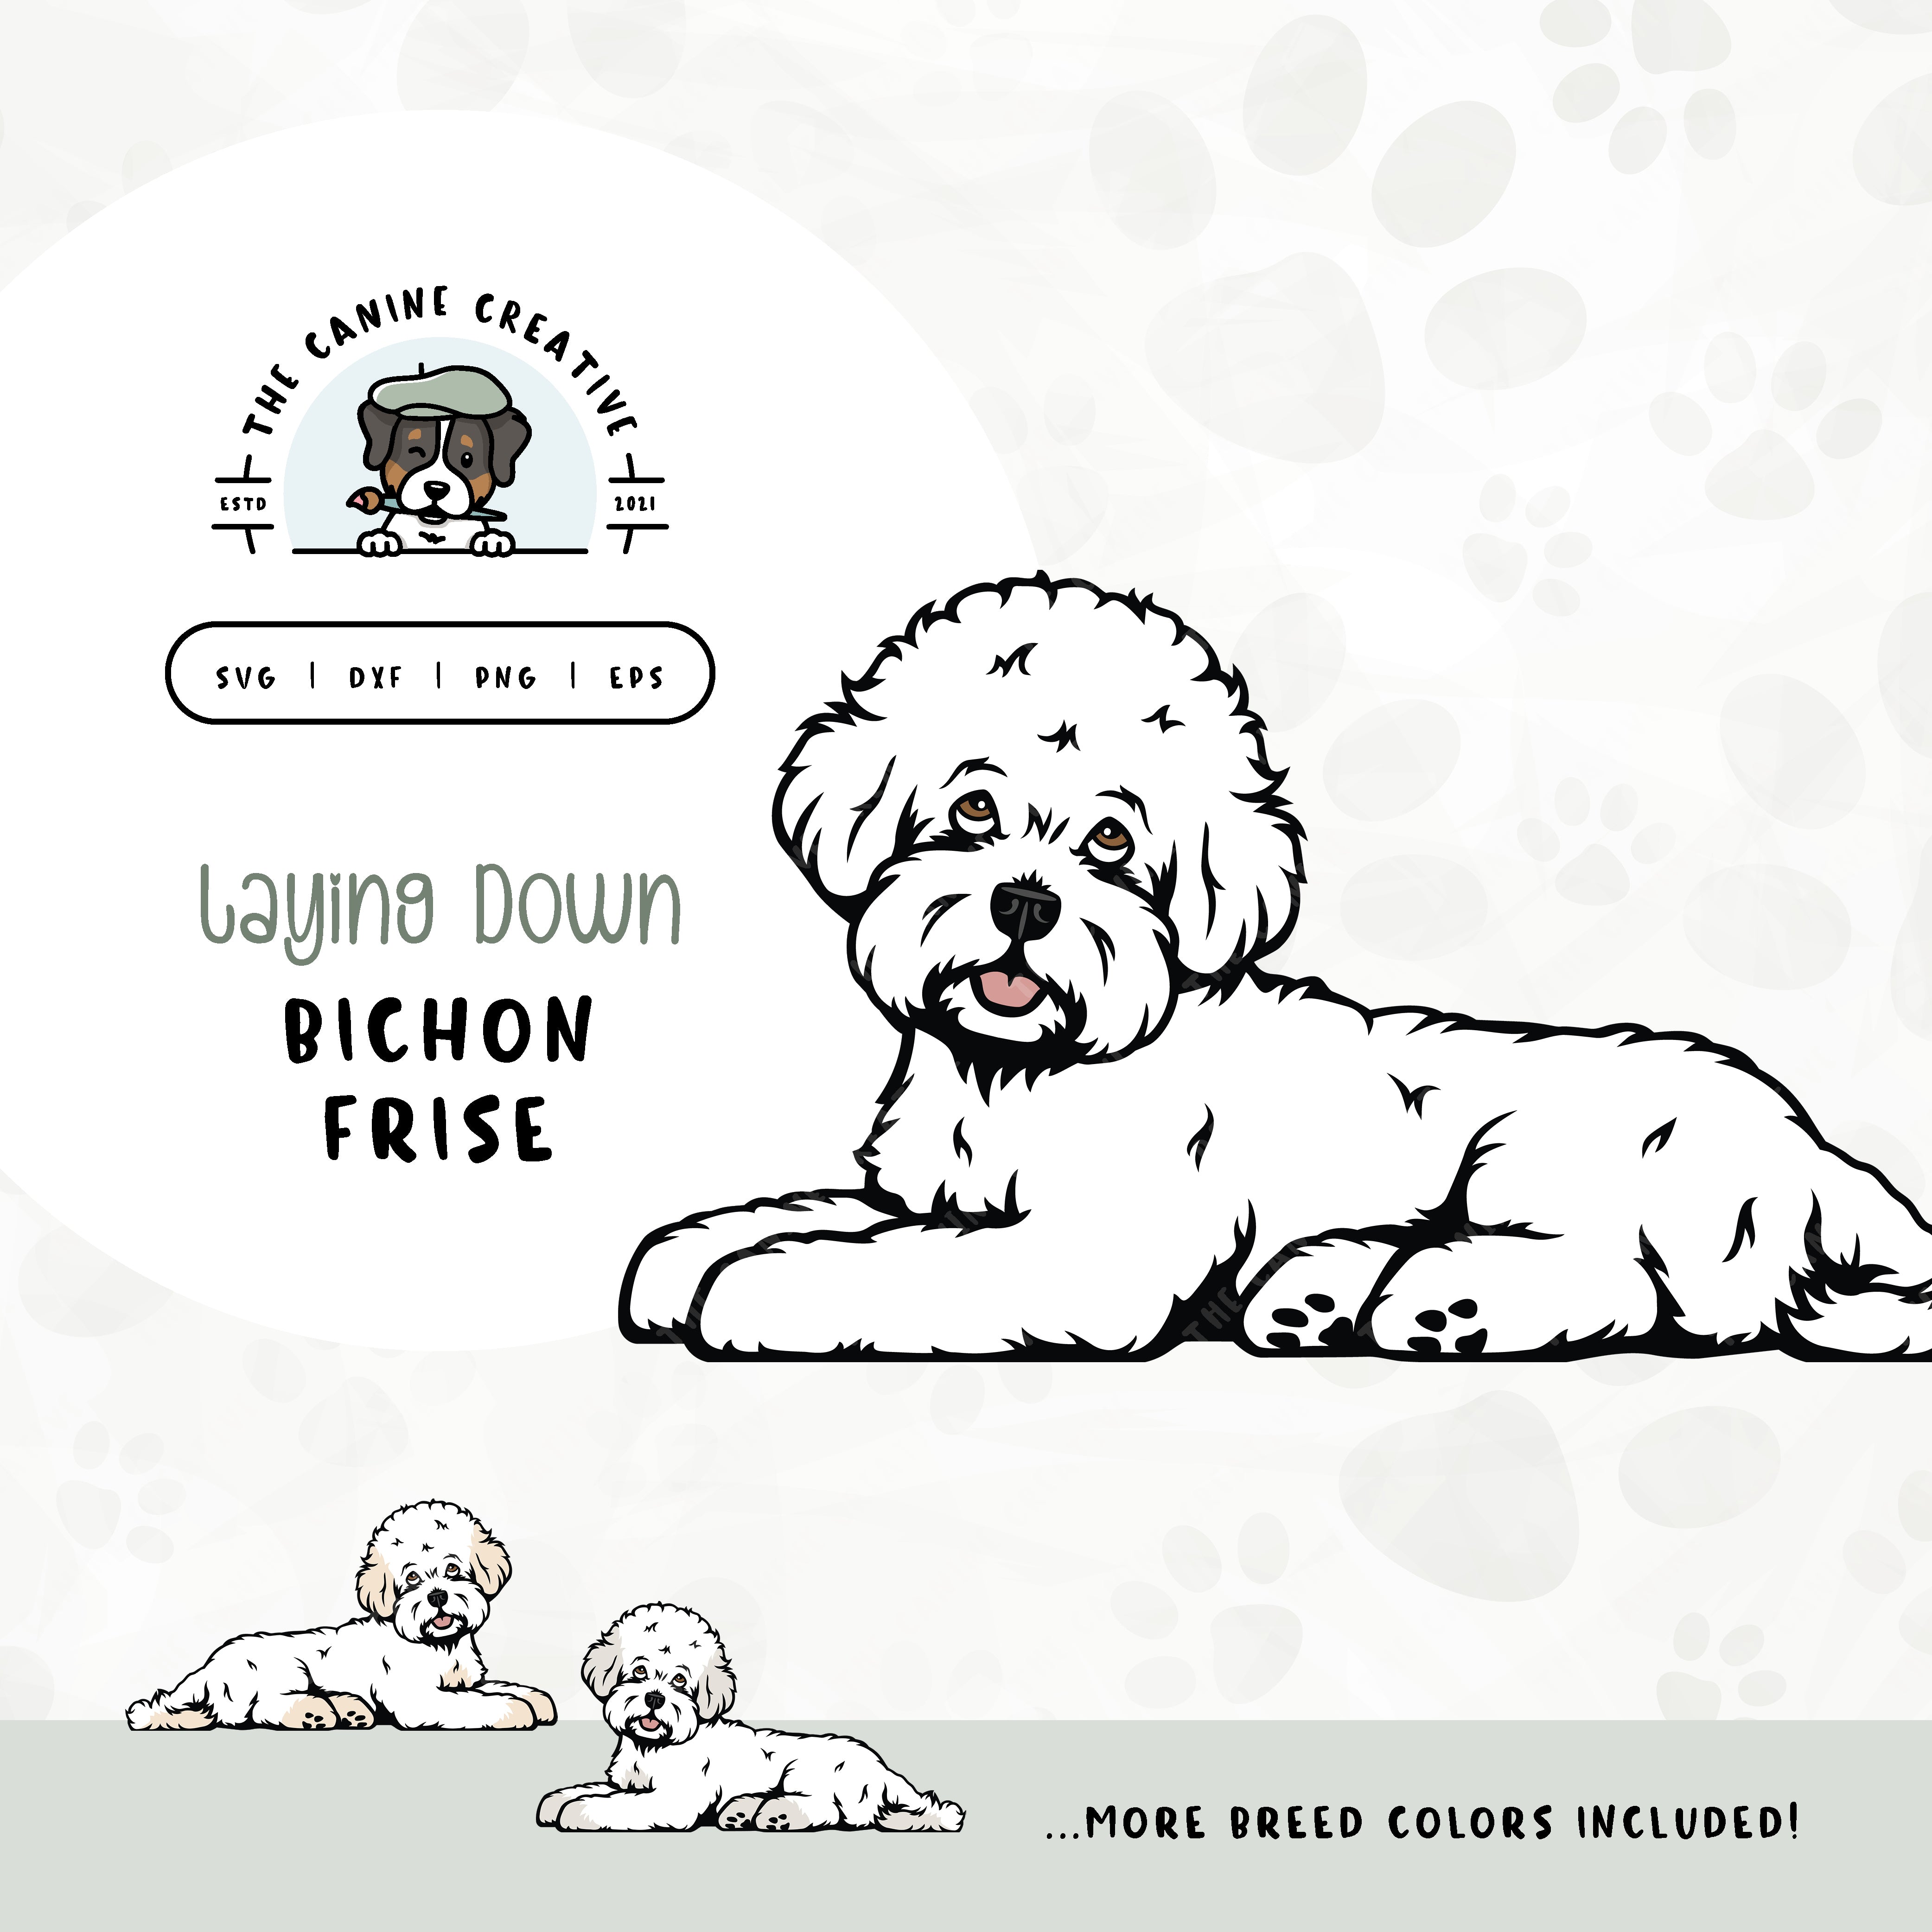 This laying down dog design features a Bichon Frise. File formats include: SVG, DXF, PNG, and EPS.